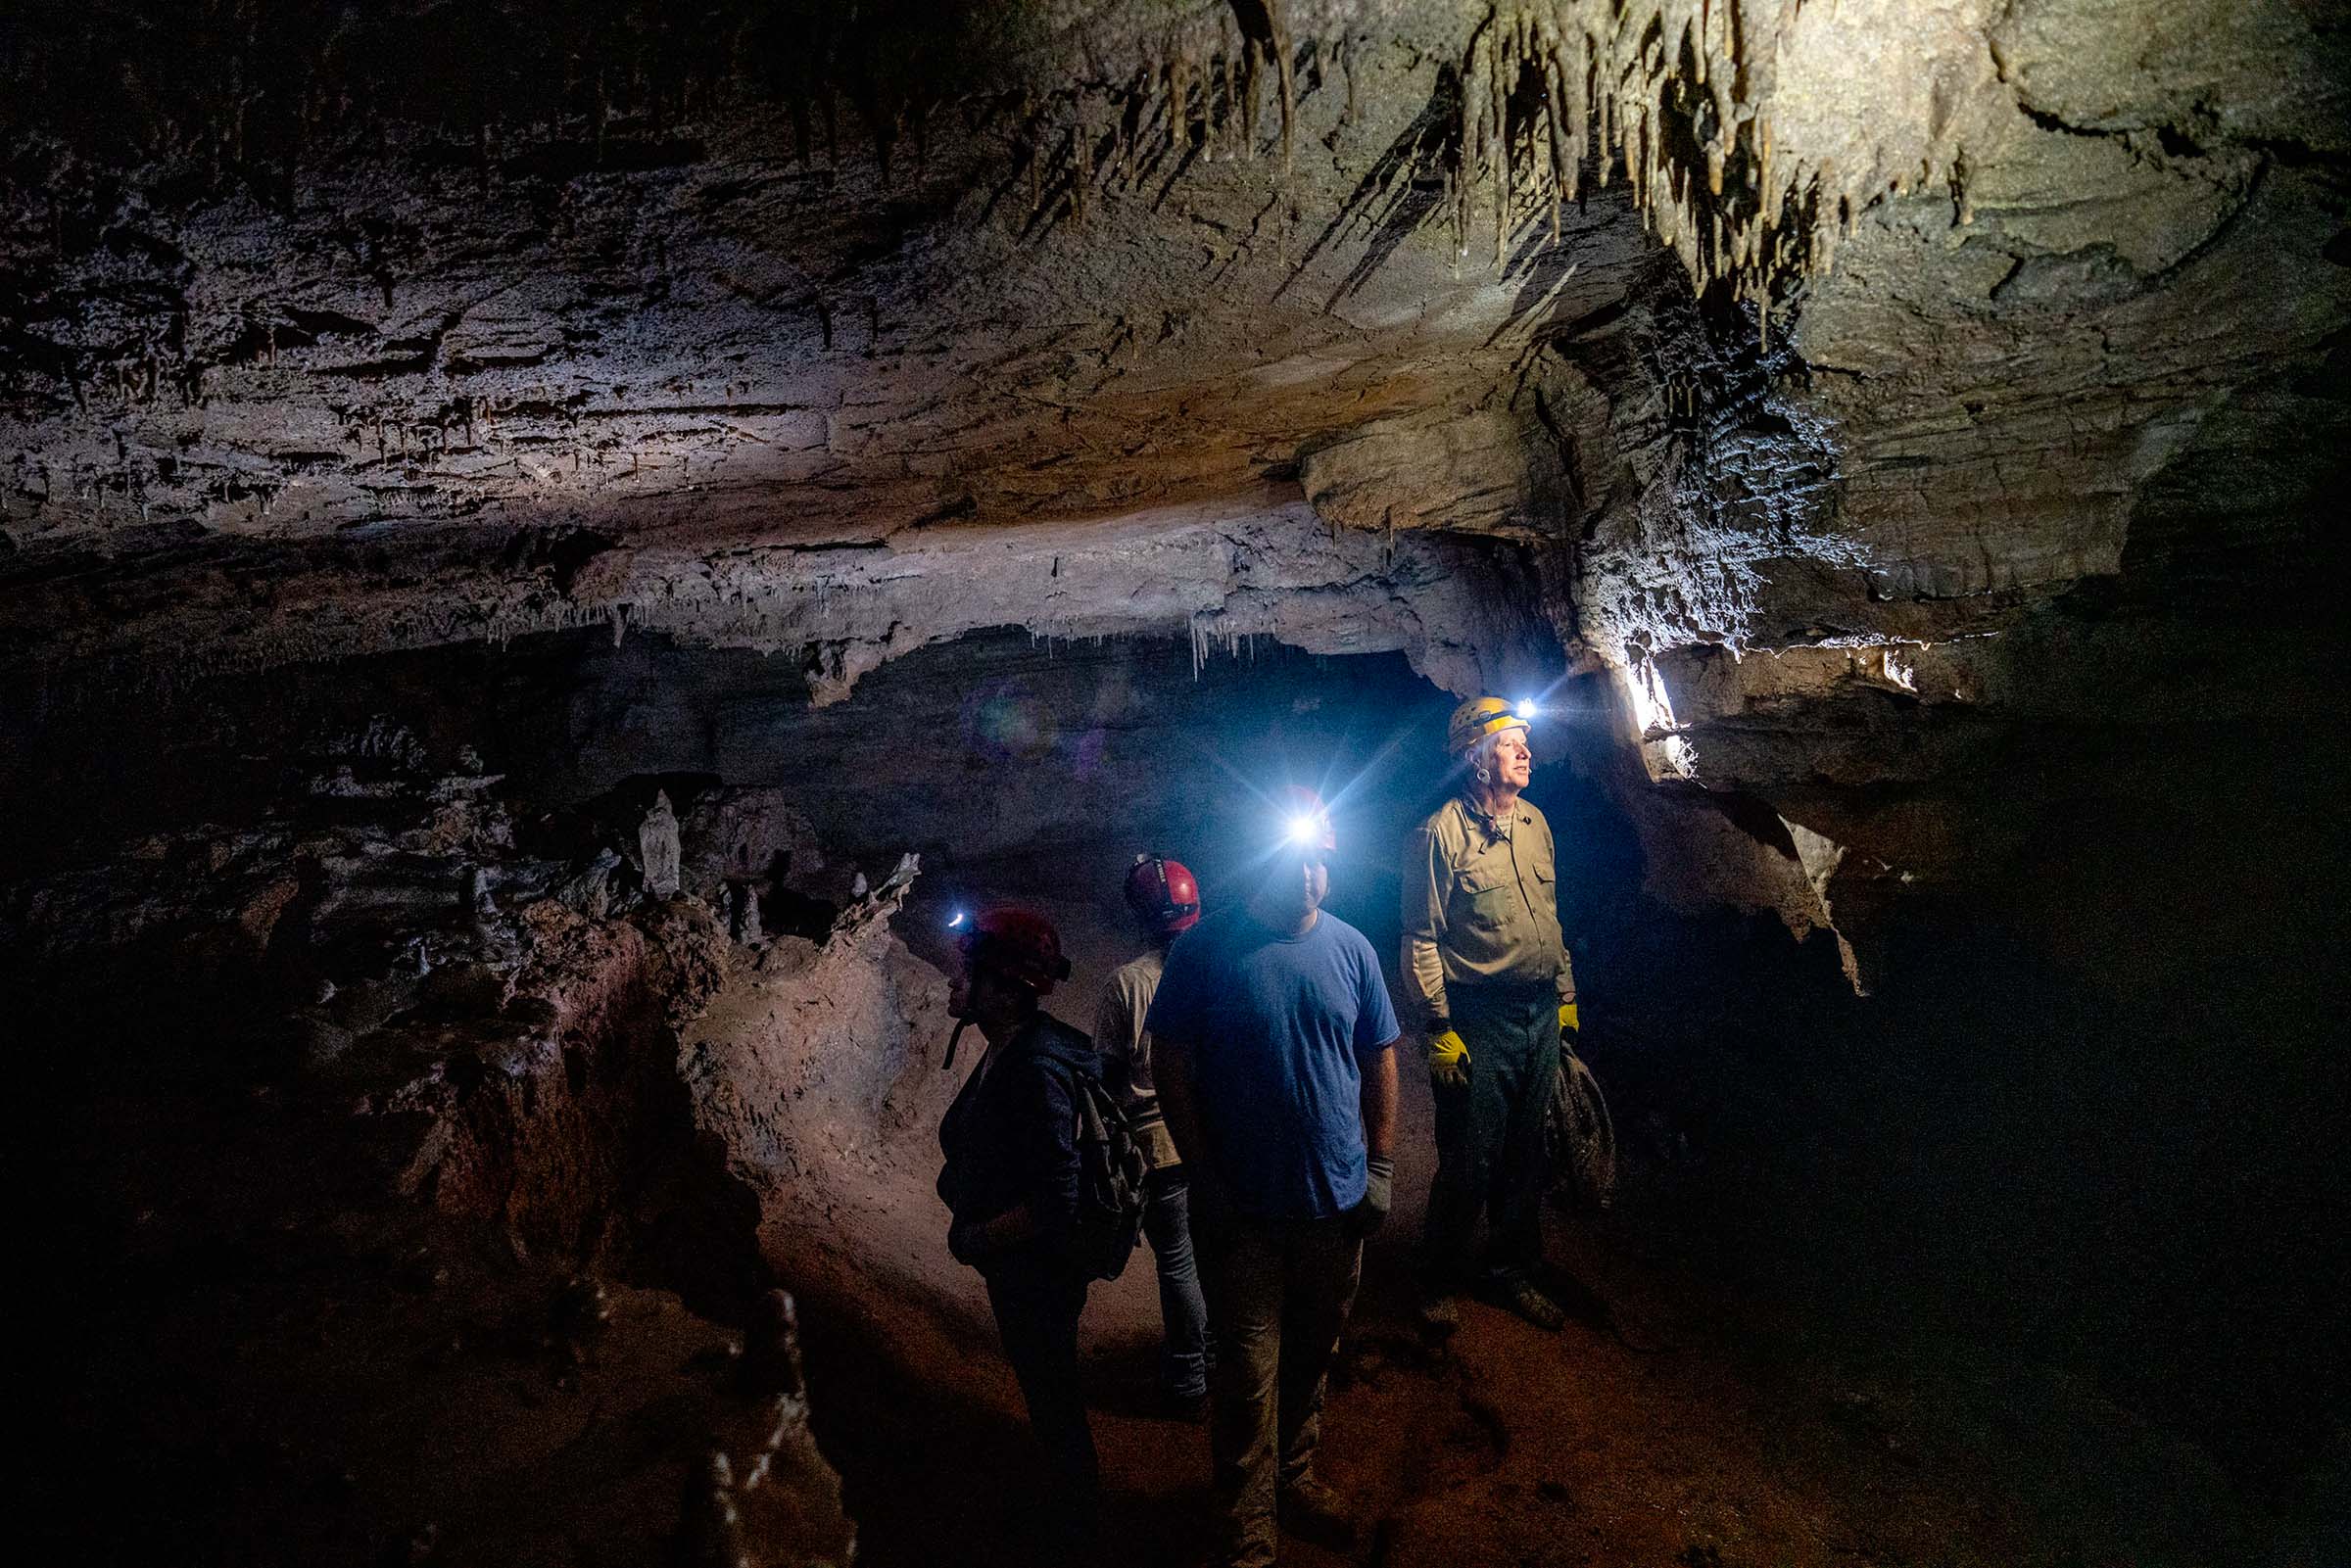 Group of people in a cave looking at the cave ceiling with head lamps